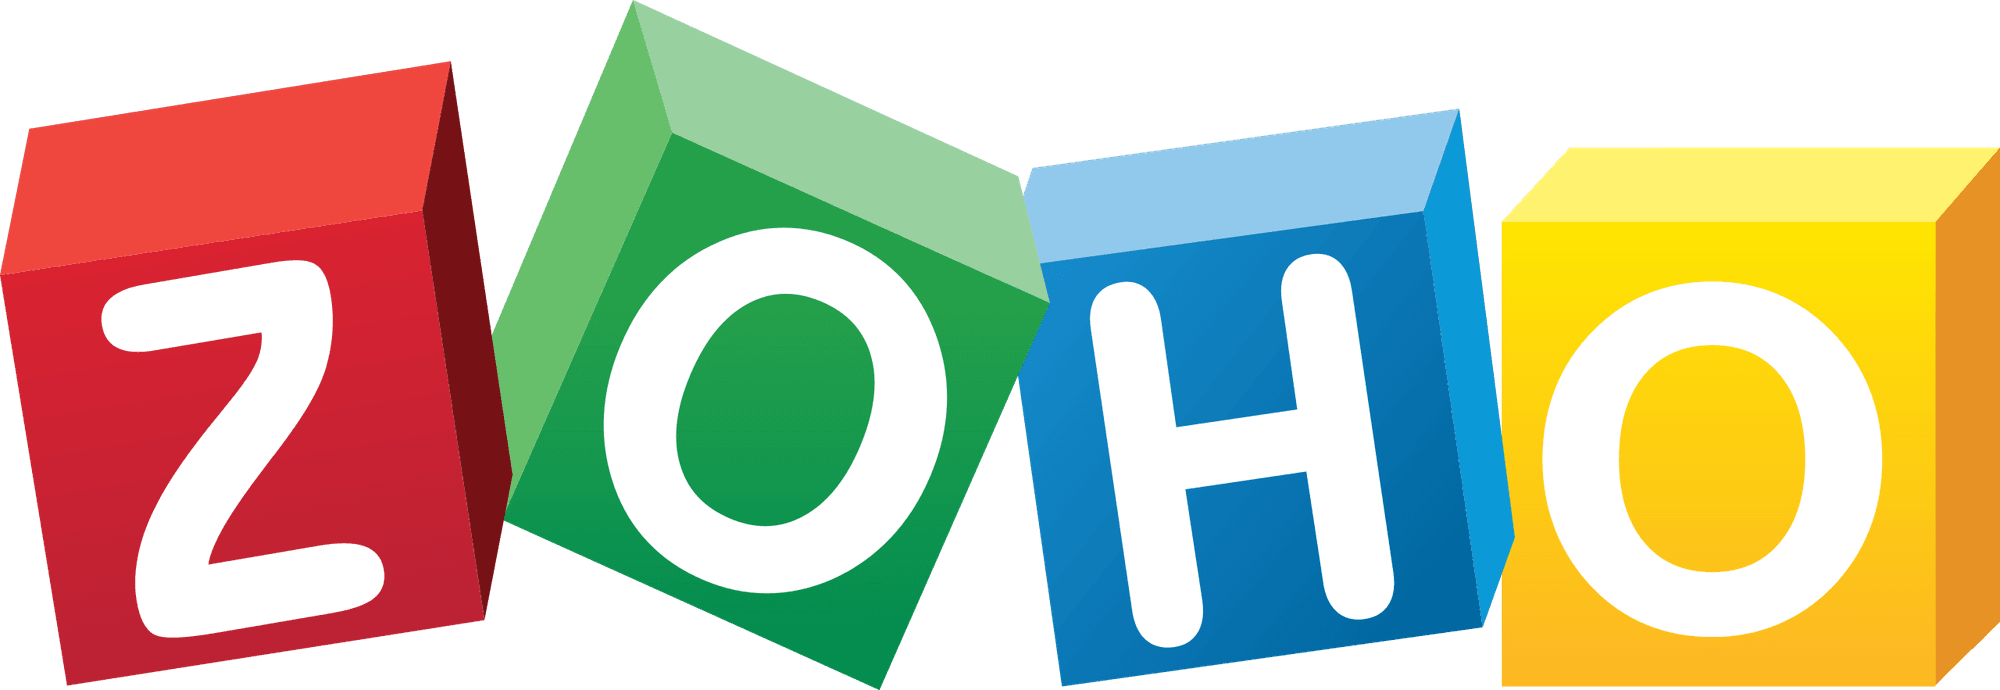 Zoho Invoice: A Review From the Team at HappyAR